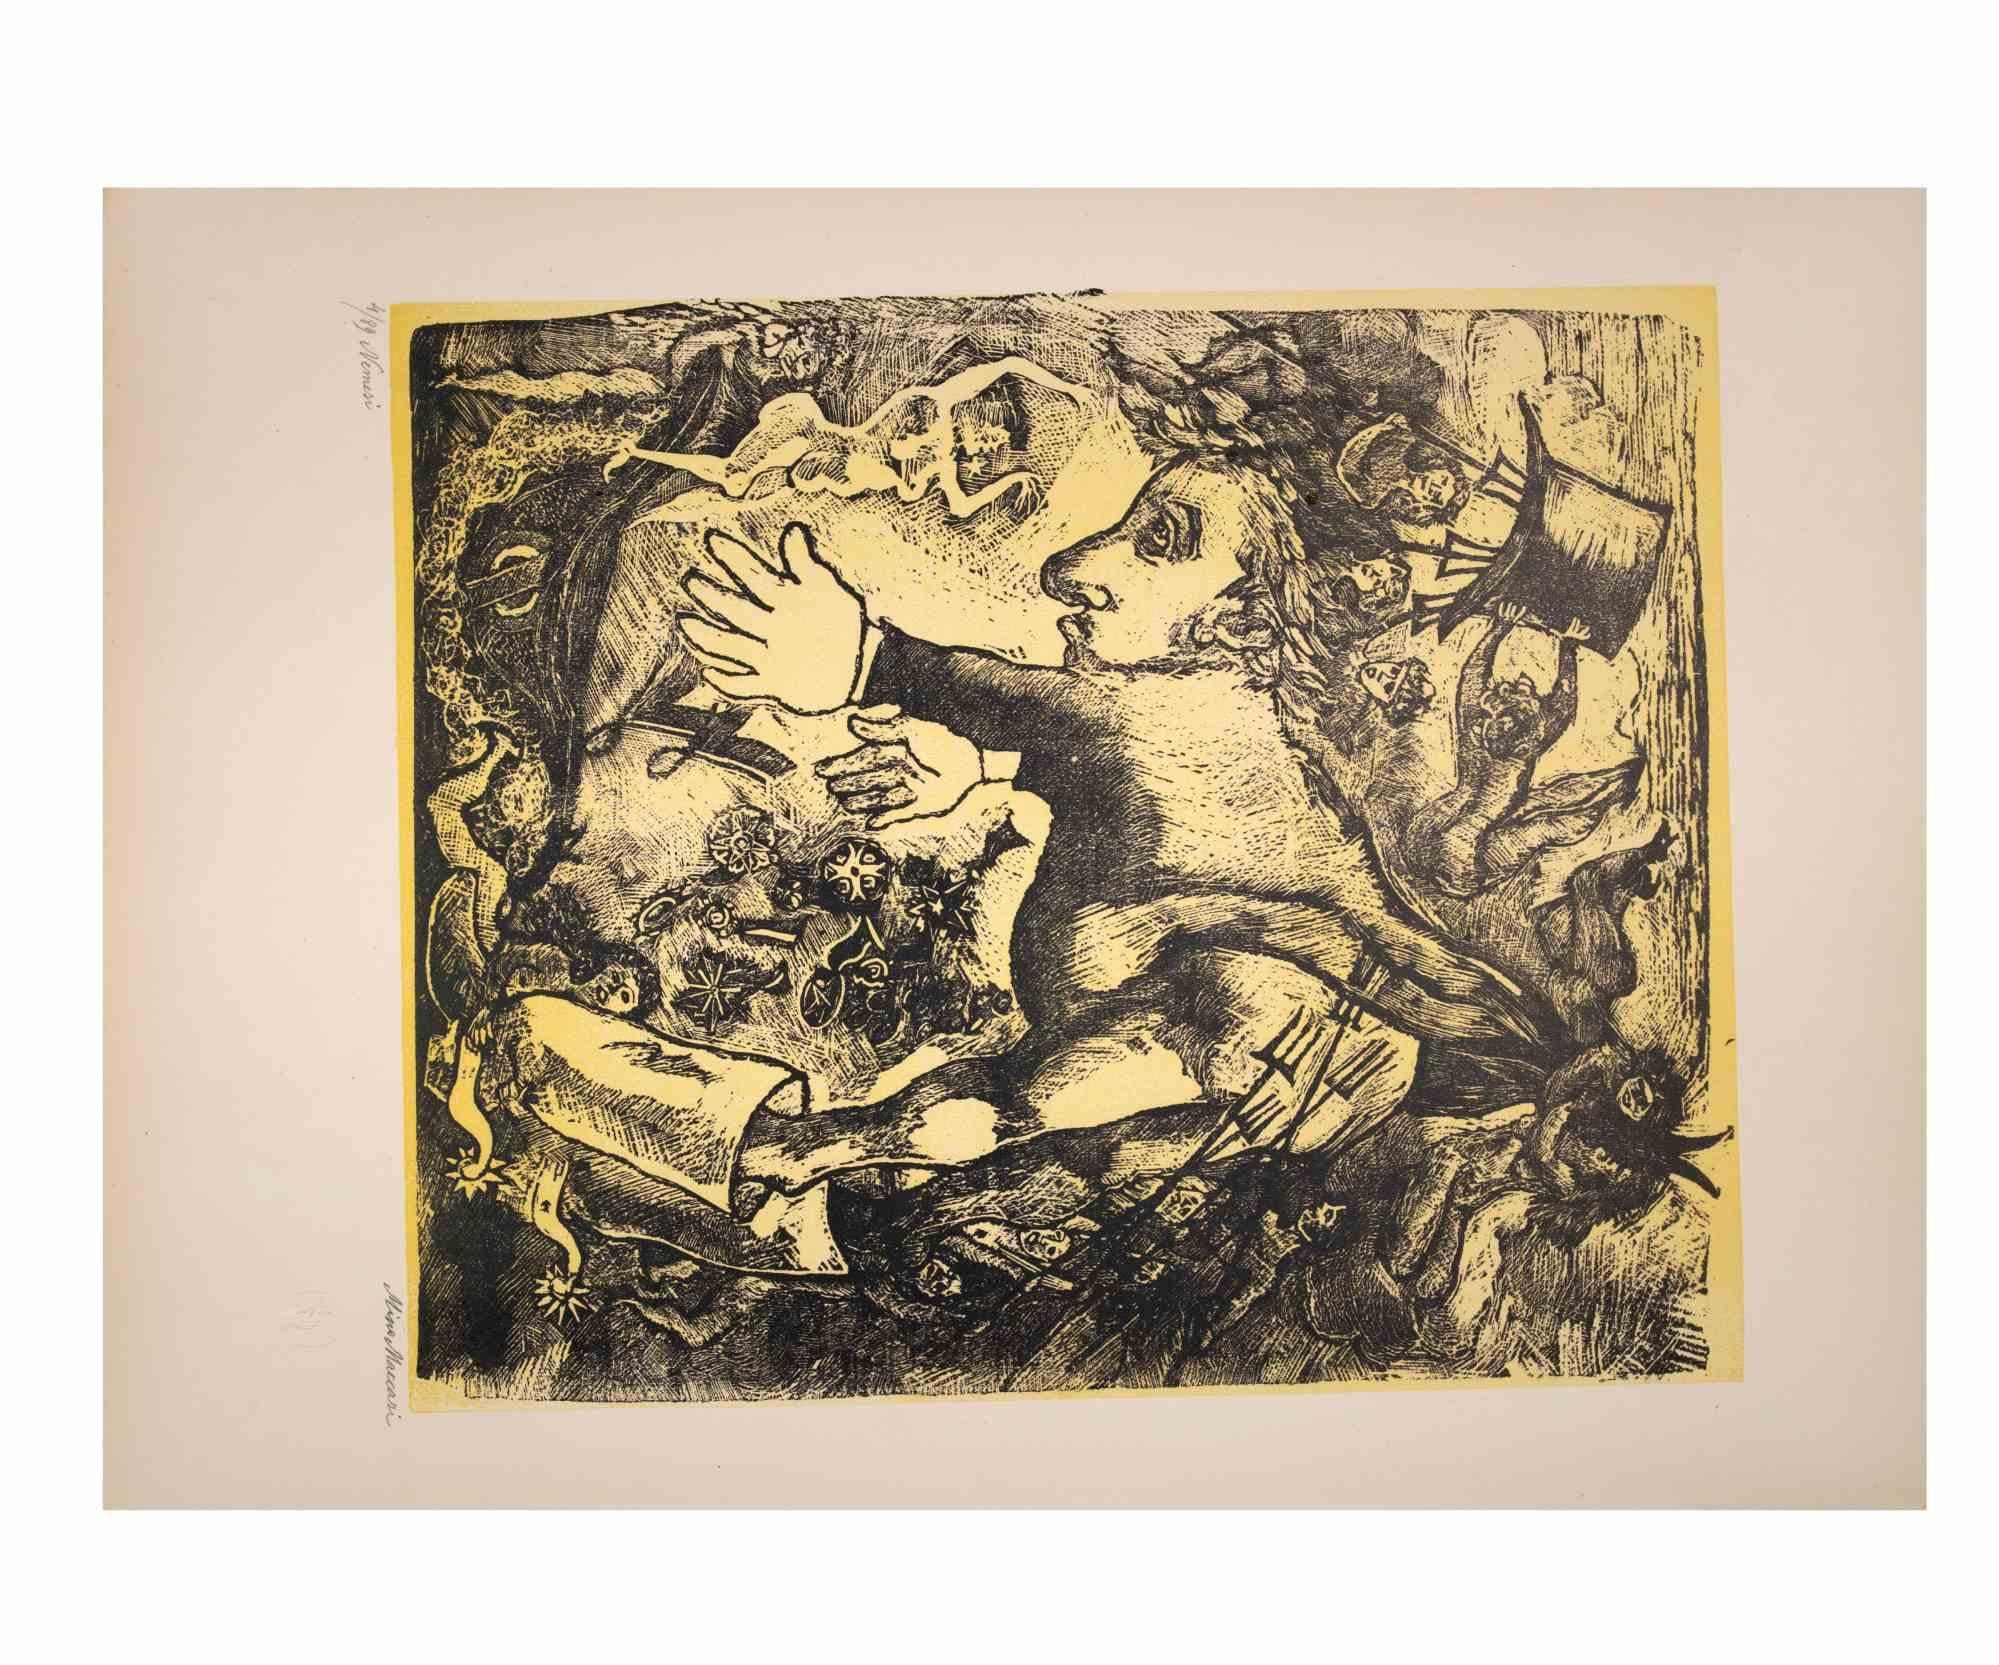  Nemesis is an Artwork realized by Mino Maccari  (1924-1989) in the Mid-20th Century.

Colored woodcut on paper. Hand-signed on the lower, numbered 4/89 specimens and titled on the left margin.

Good conditions.

Mino Maccari (Siena, 1924-Rome, June